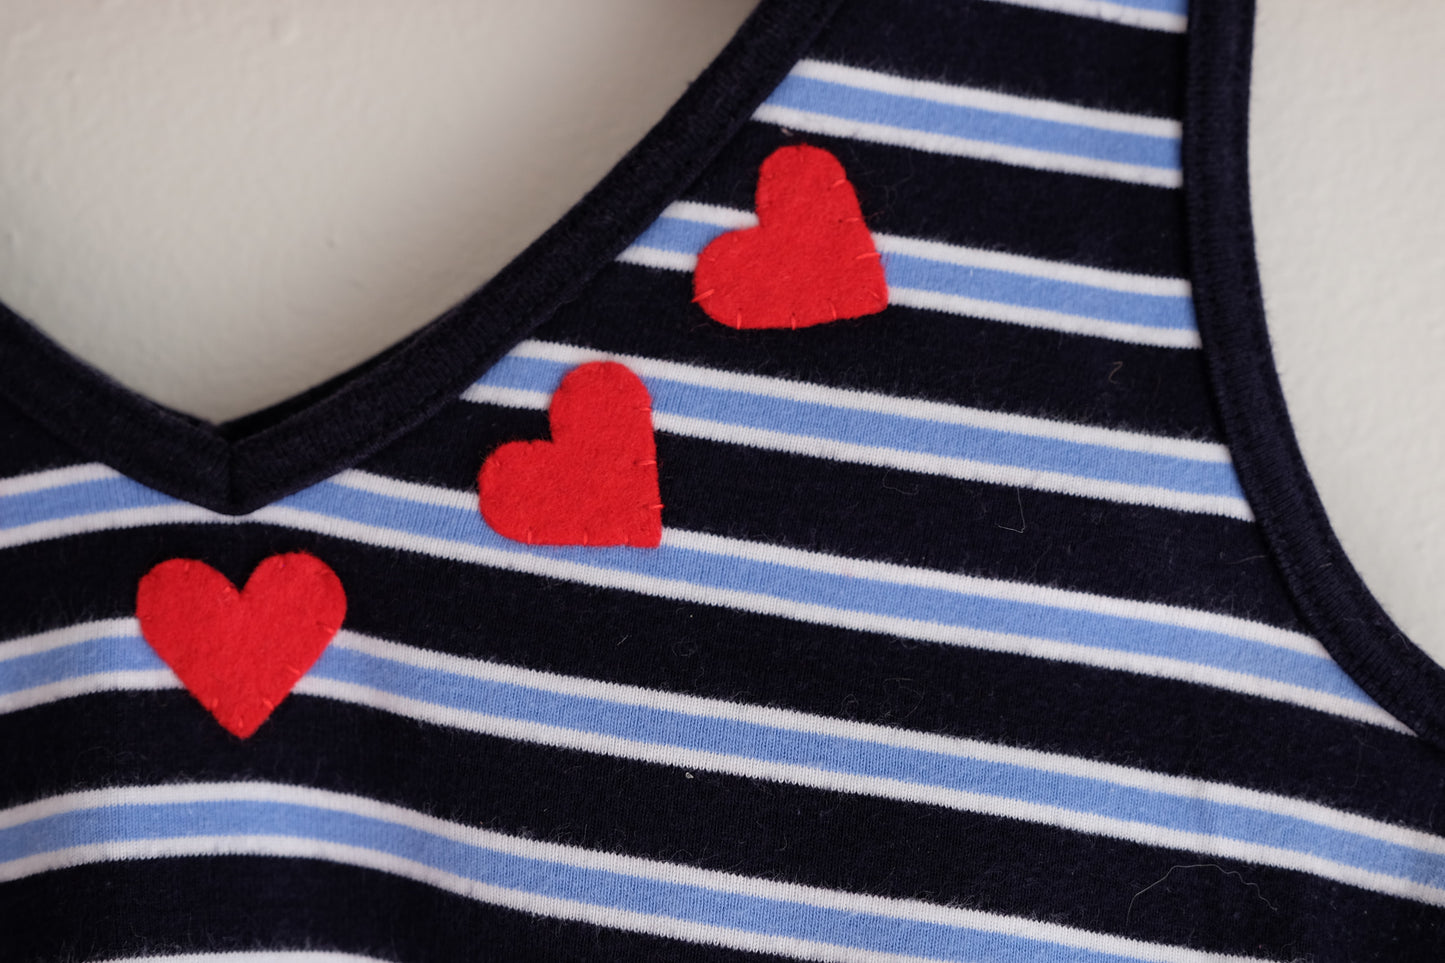 blue stripes with hearts